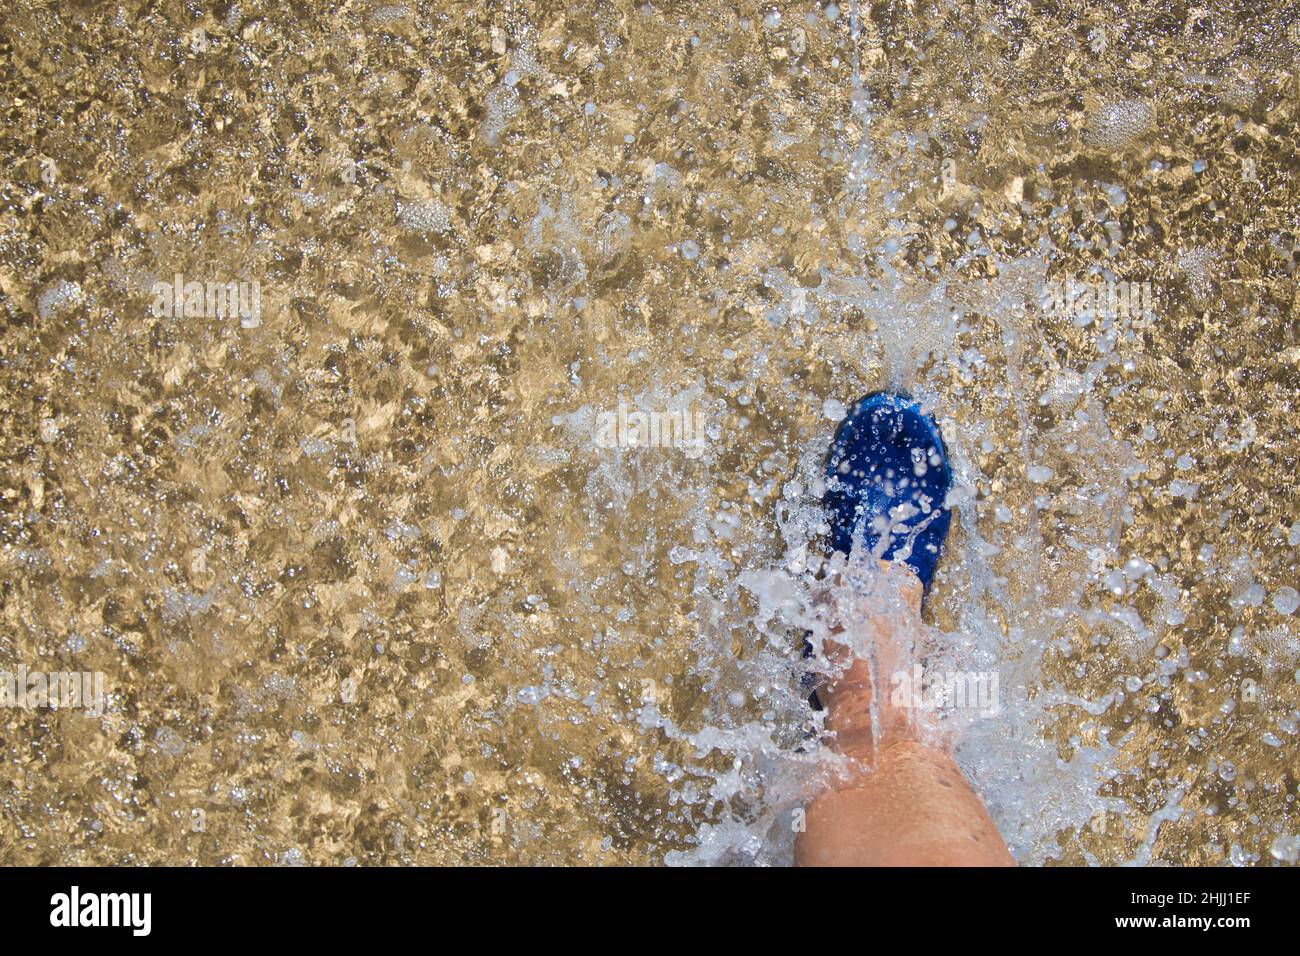 Walking in Water on the beach Stock Photo